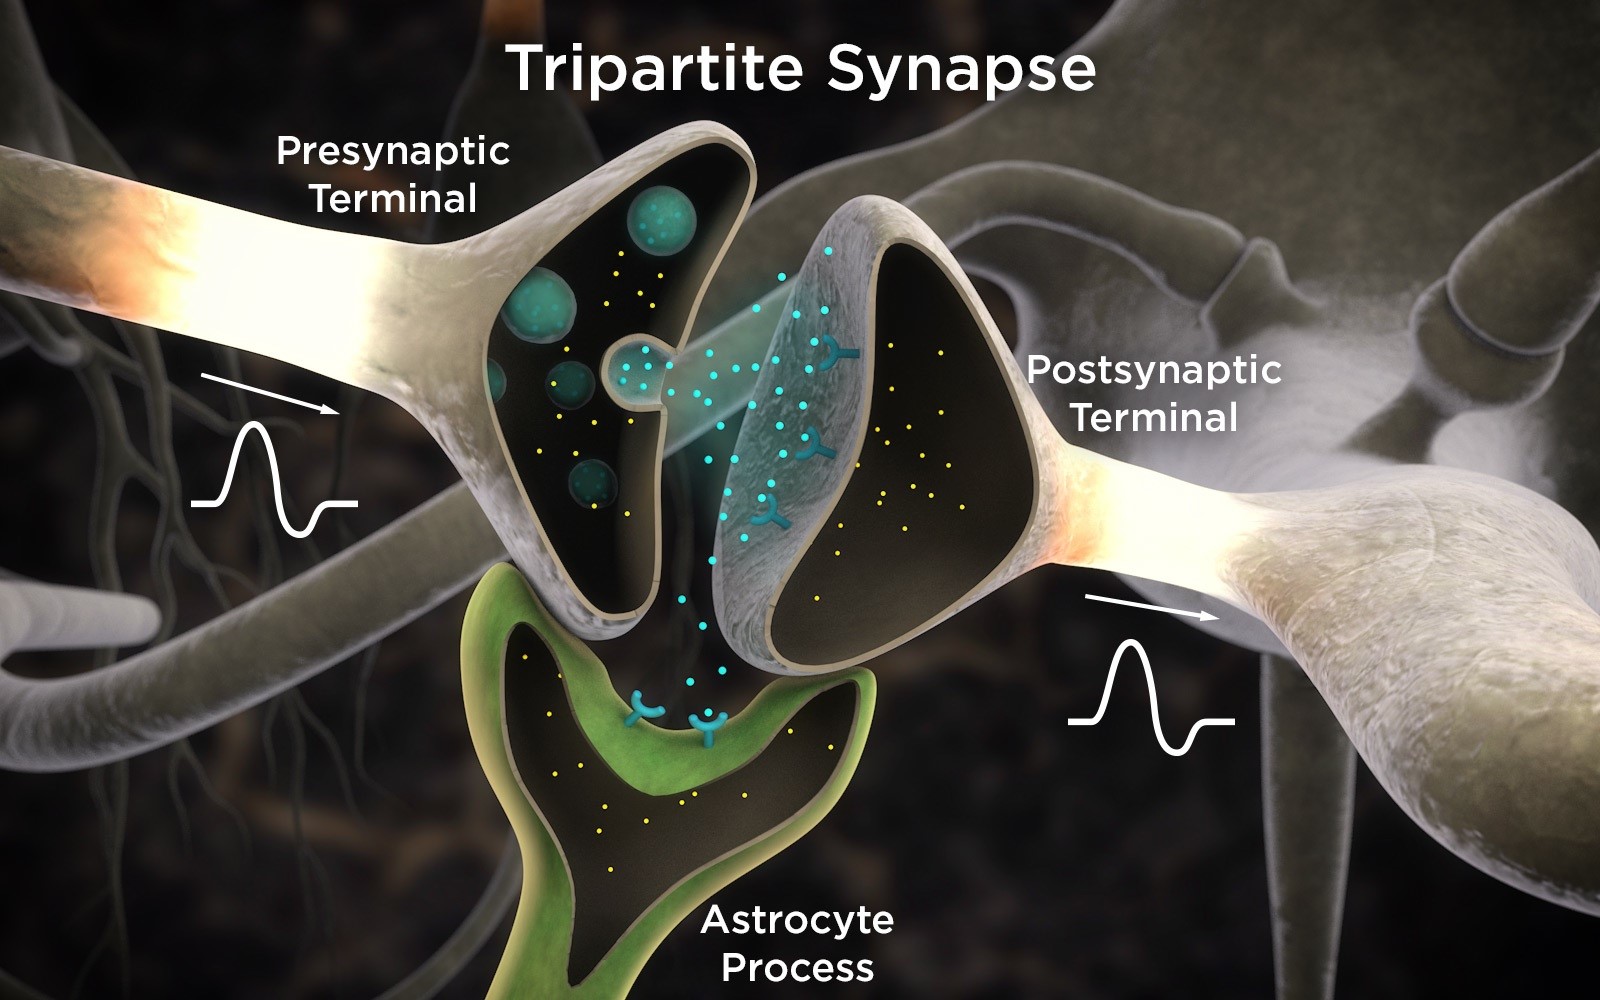 Astrocytes control mapping of synaptic connections and memories |  Ikerbasque Basque Foundation for Science